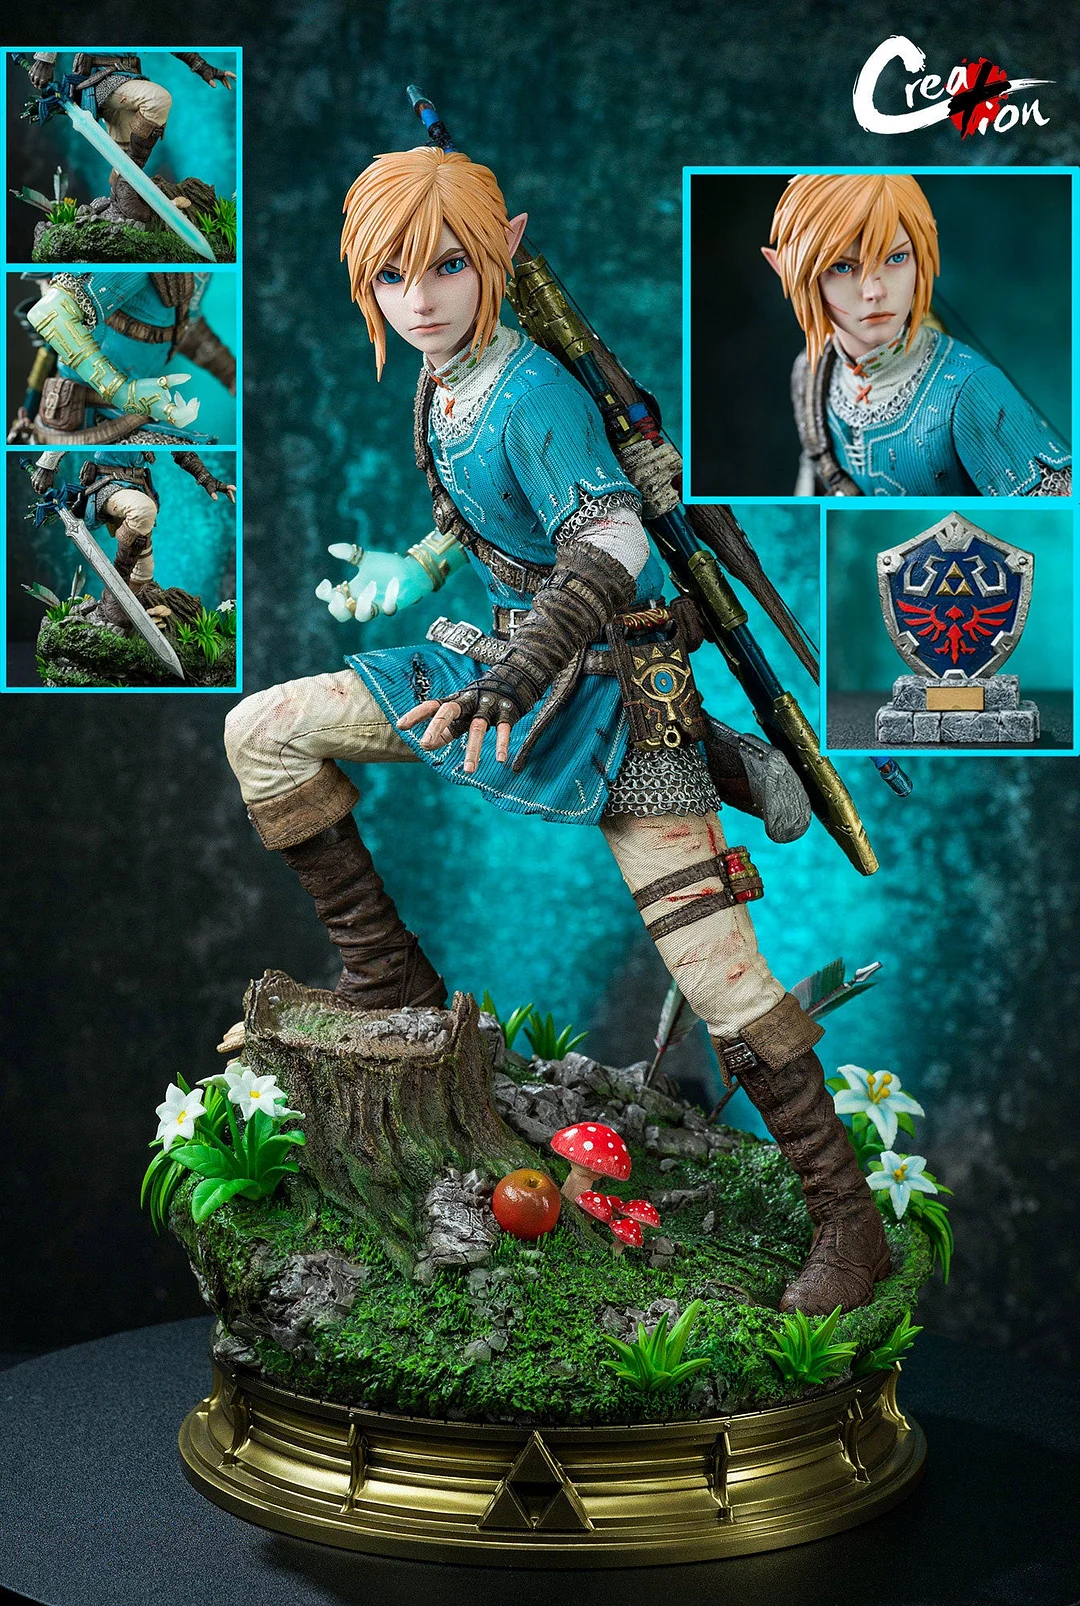 The Legend of Zelda Breath of the Wild Link 4 Action Figure with